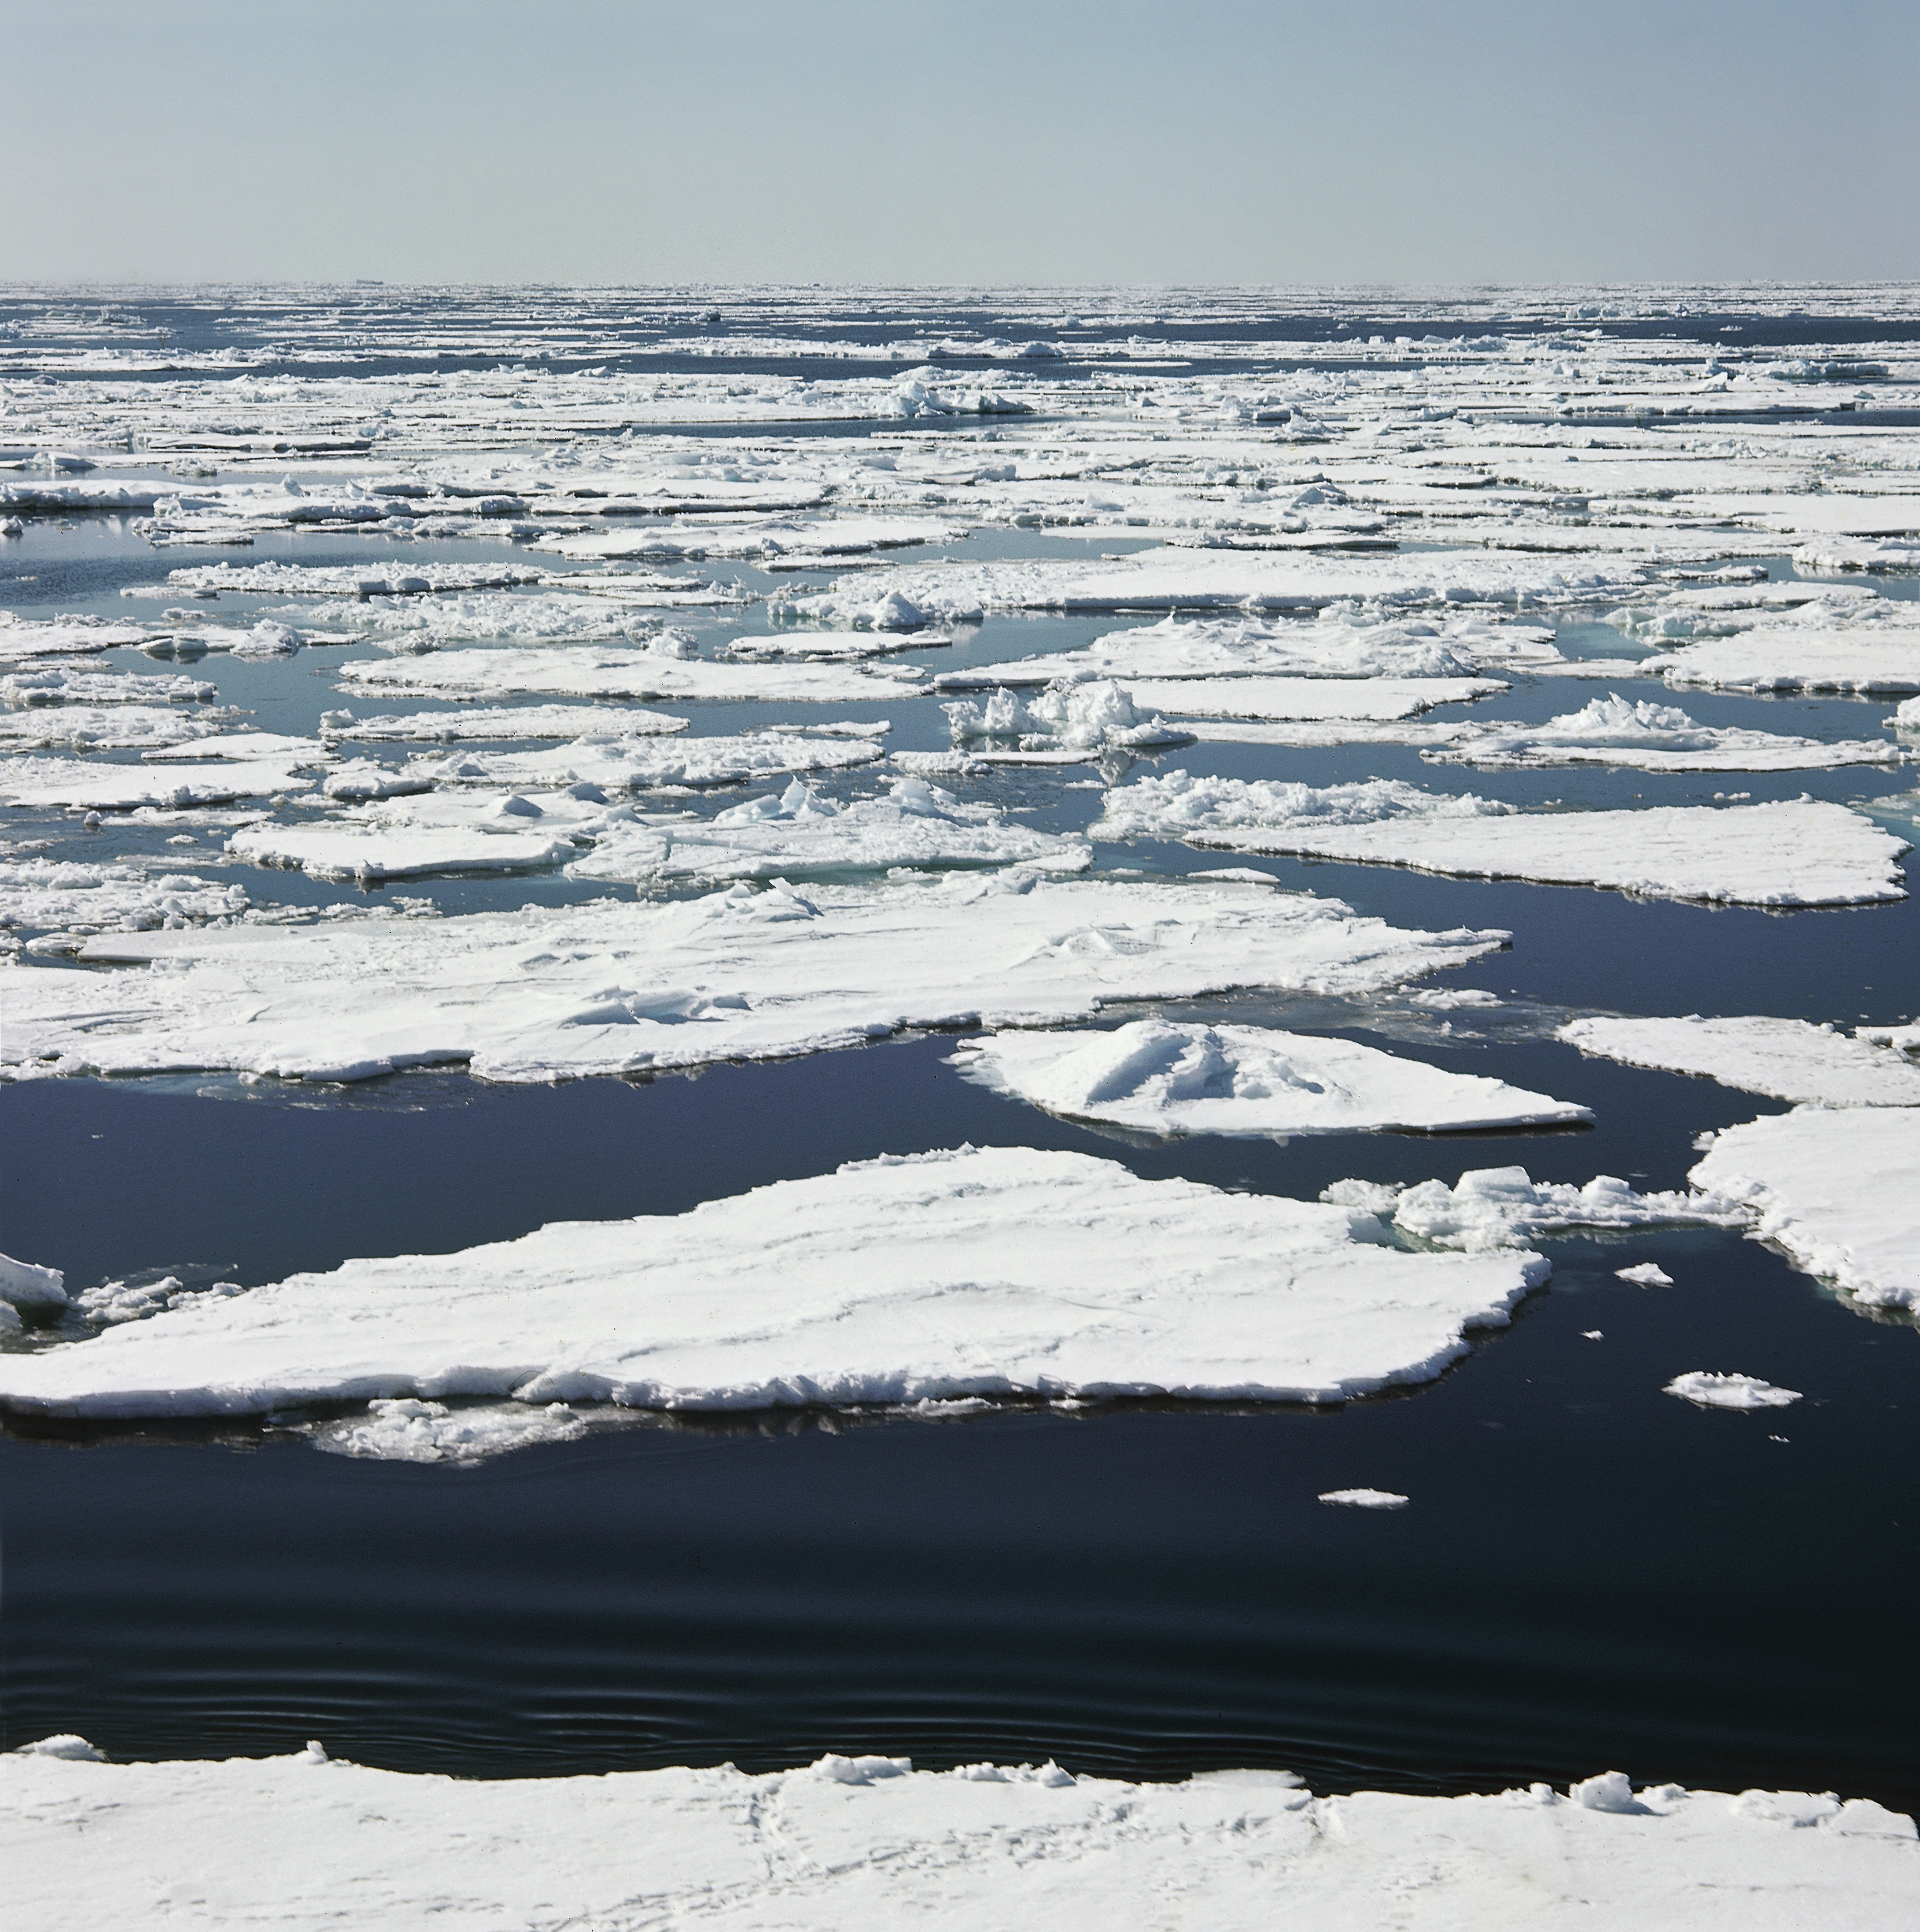 Ice floating in Ross Sea, Antarctica on June 15, 2014. (De Agostini—Getty Images)